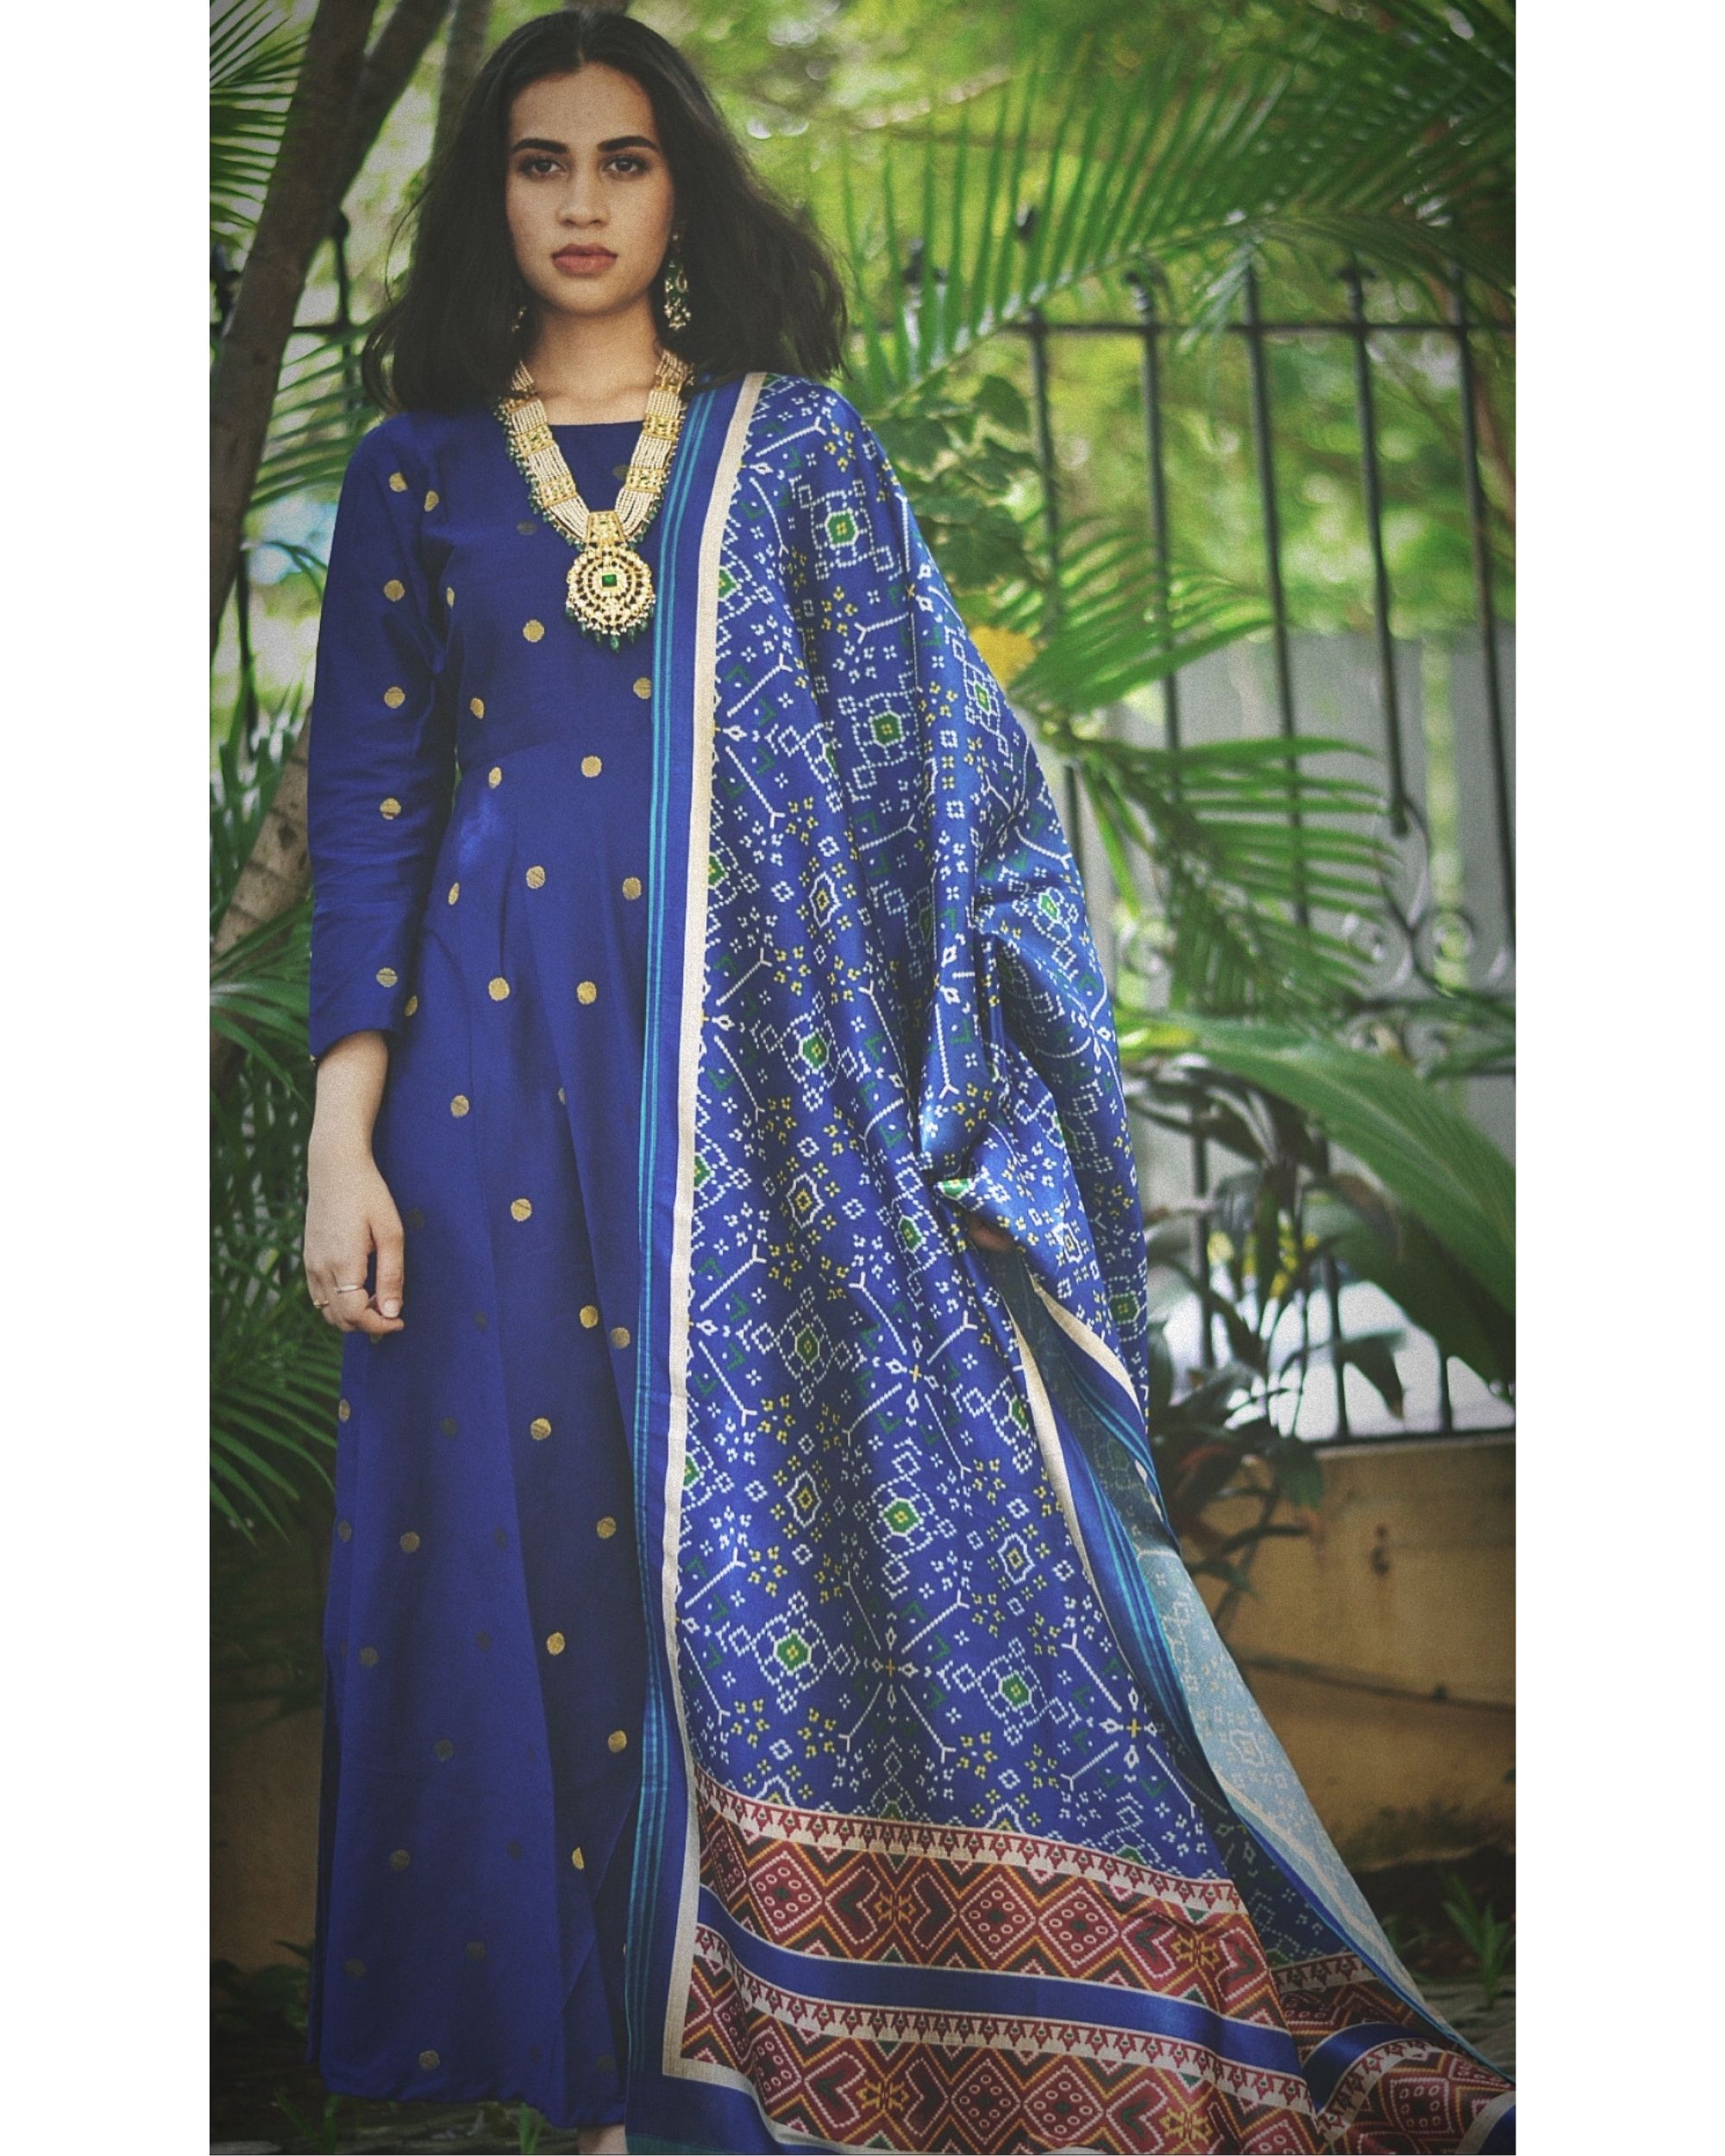 Blue root dress with dark blue patola dupatta - set of two